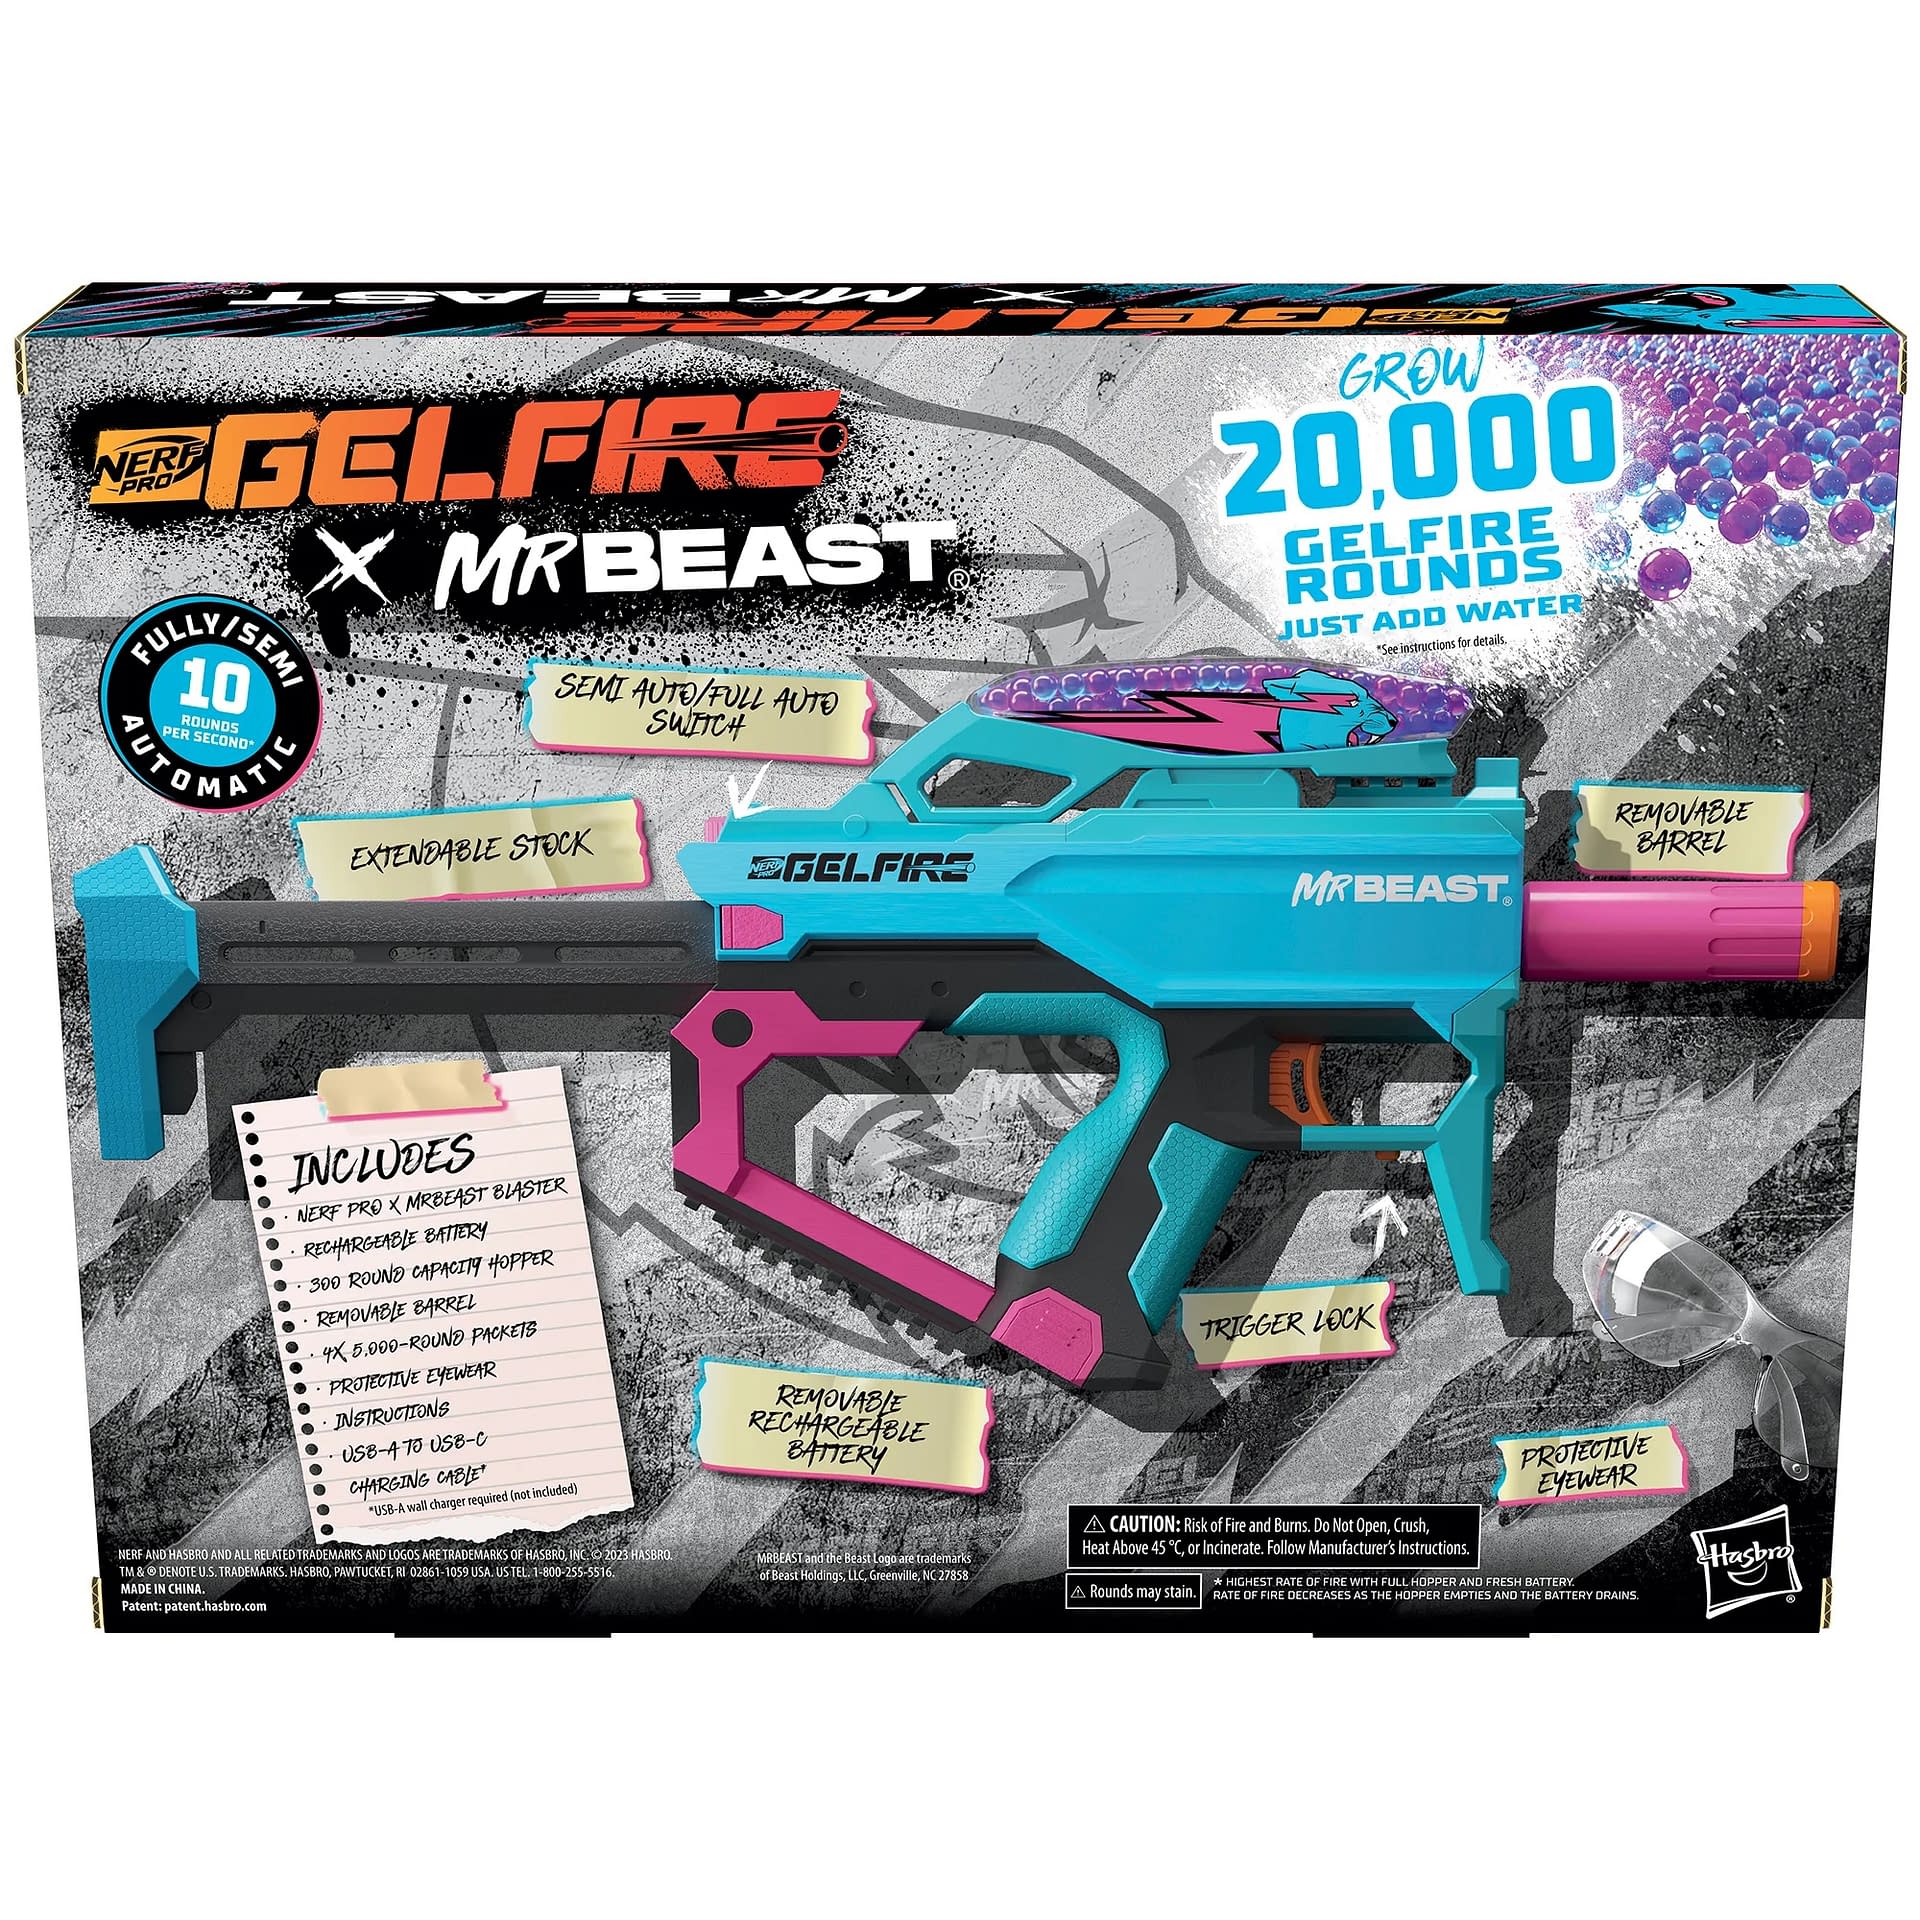 Special Edition MrBeast NERF Pro Gelfire Revealed from Hasbro 